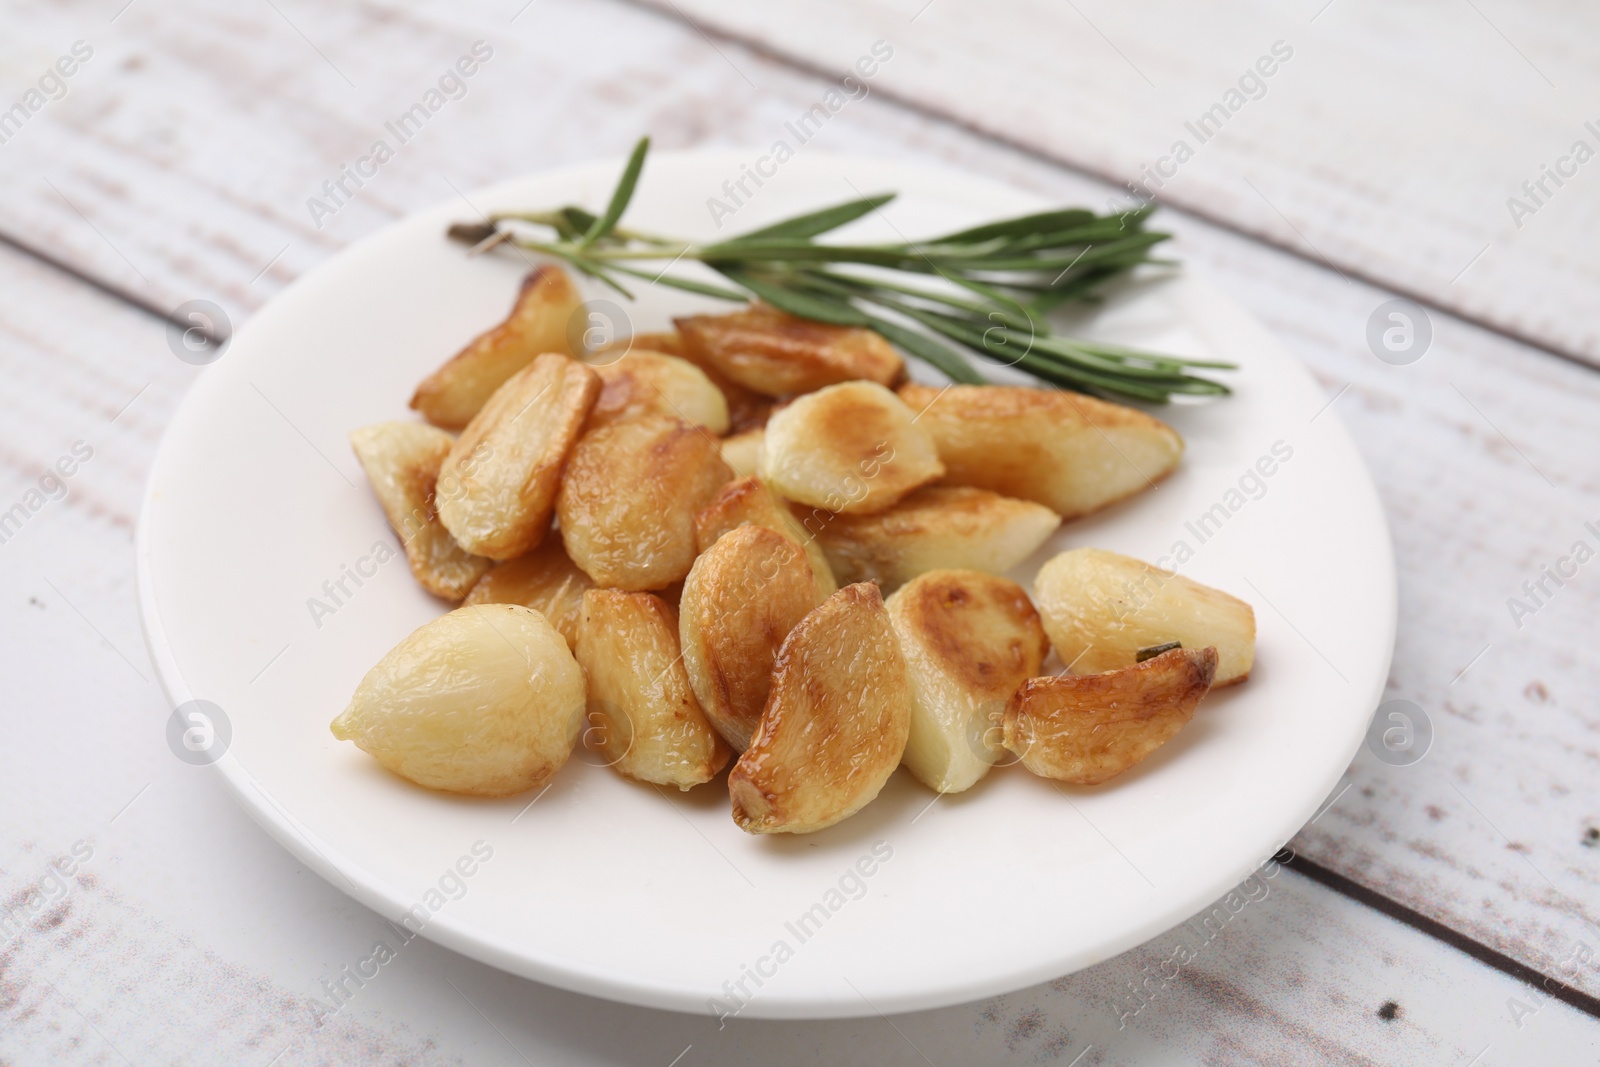 Photo of Fried garlic cloves and rosemary on wooden table, closeup